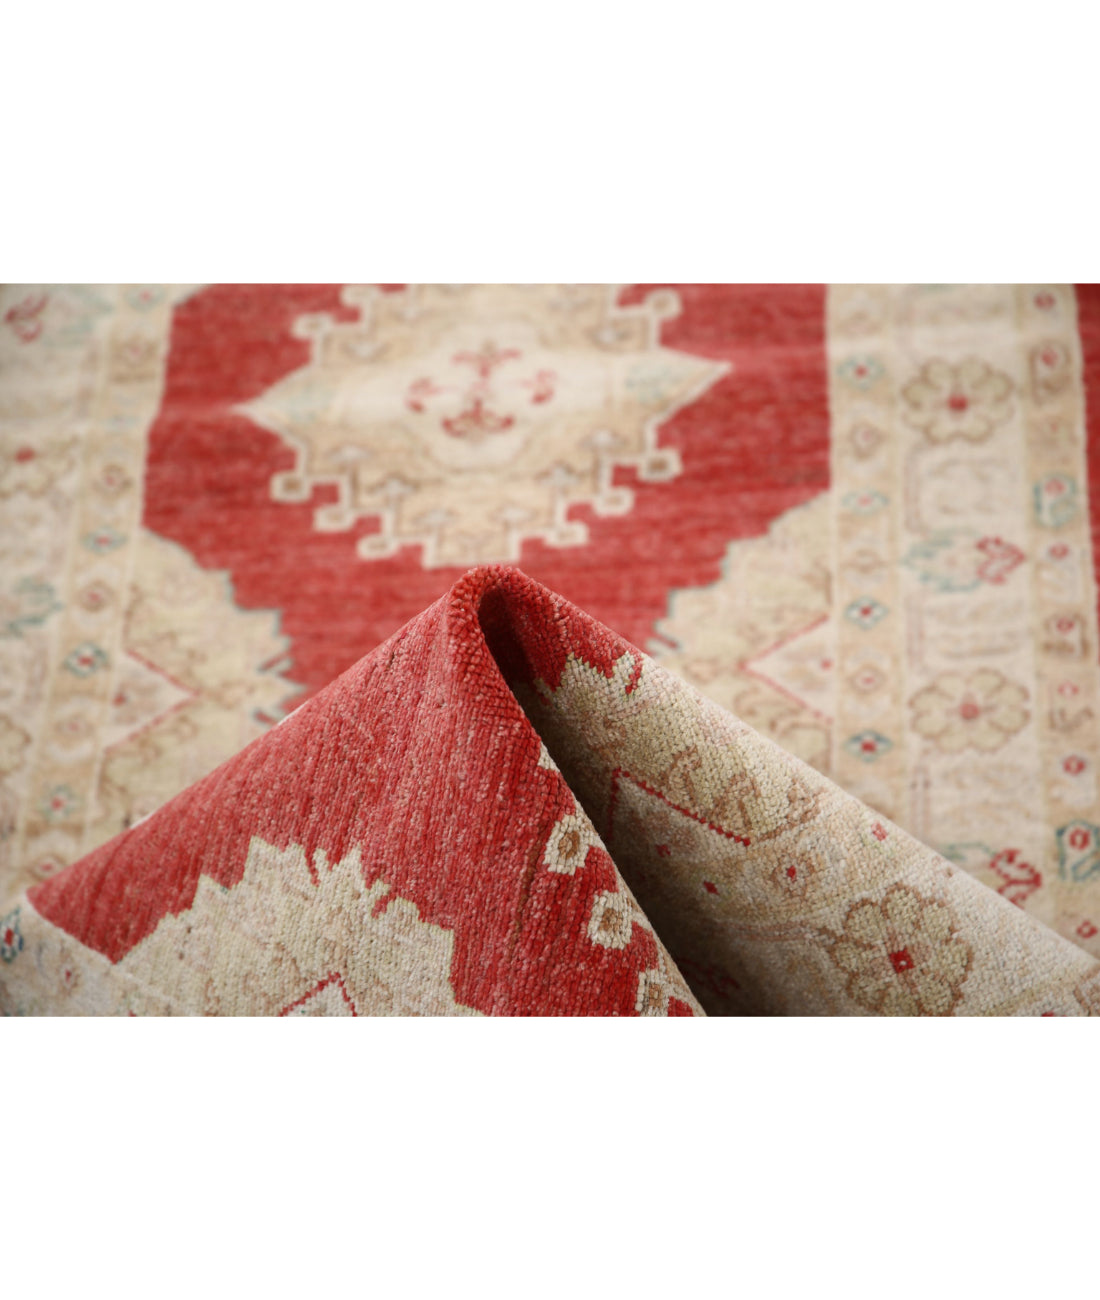 Ziegler 2'9'' X 7'11'' Hand-Knotted Wool Rug 2'9'' x 7'11'' (83 X 238) / Red / Red